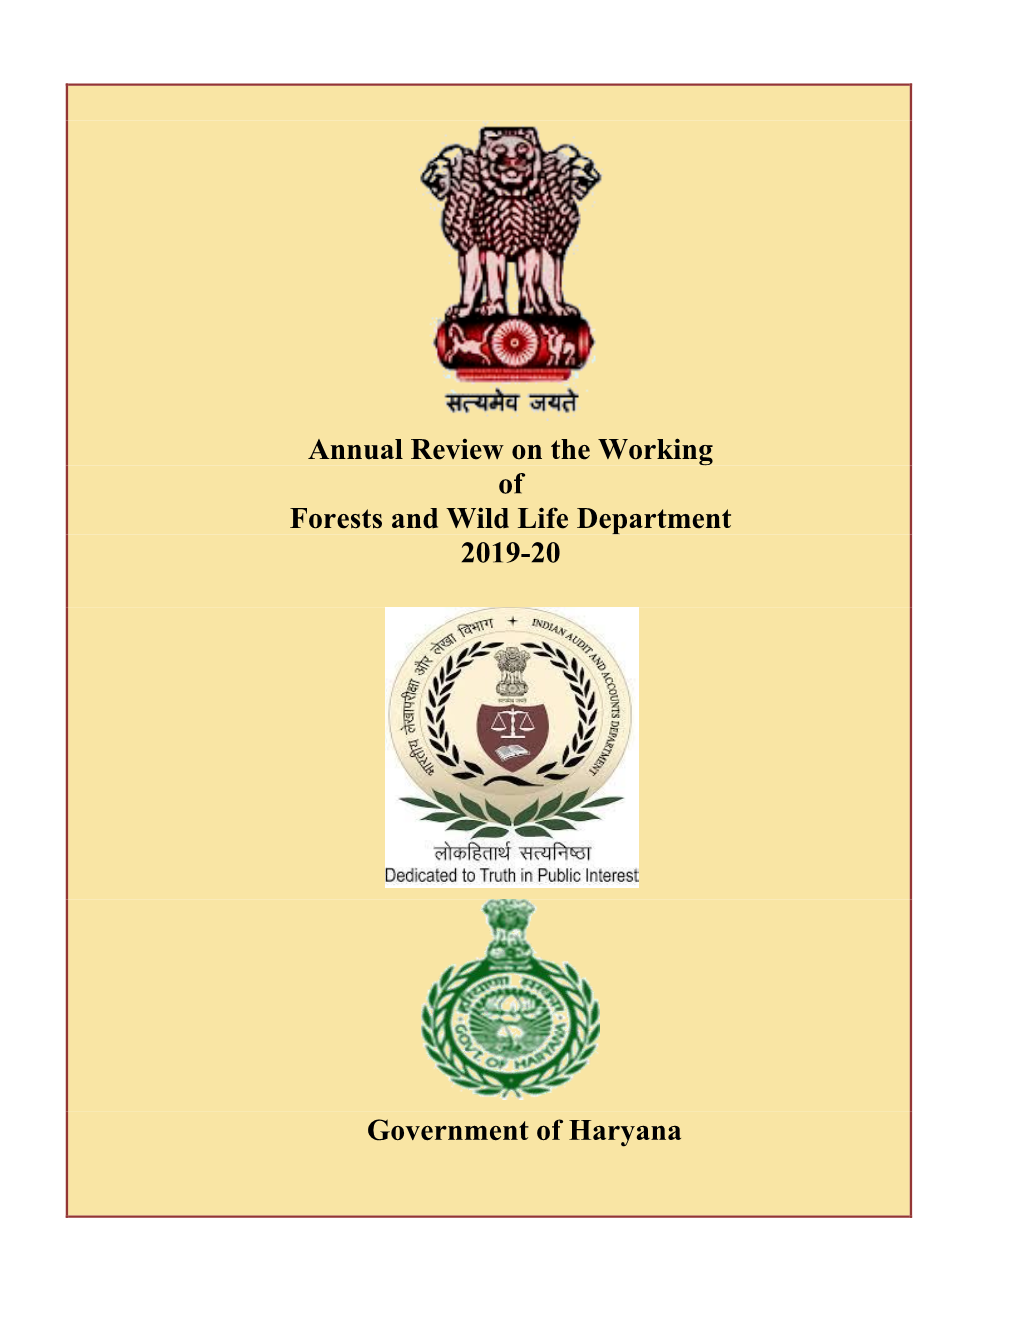 Annual Review on the Working of Forests and Wild Life Department 2019-20 Government of Haryana